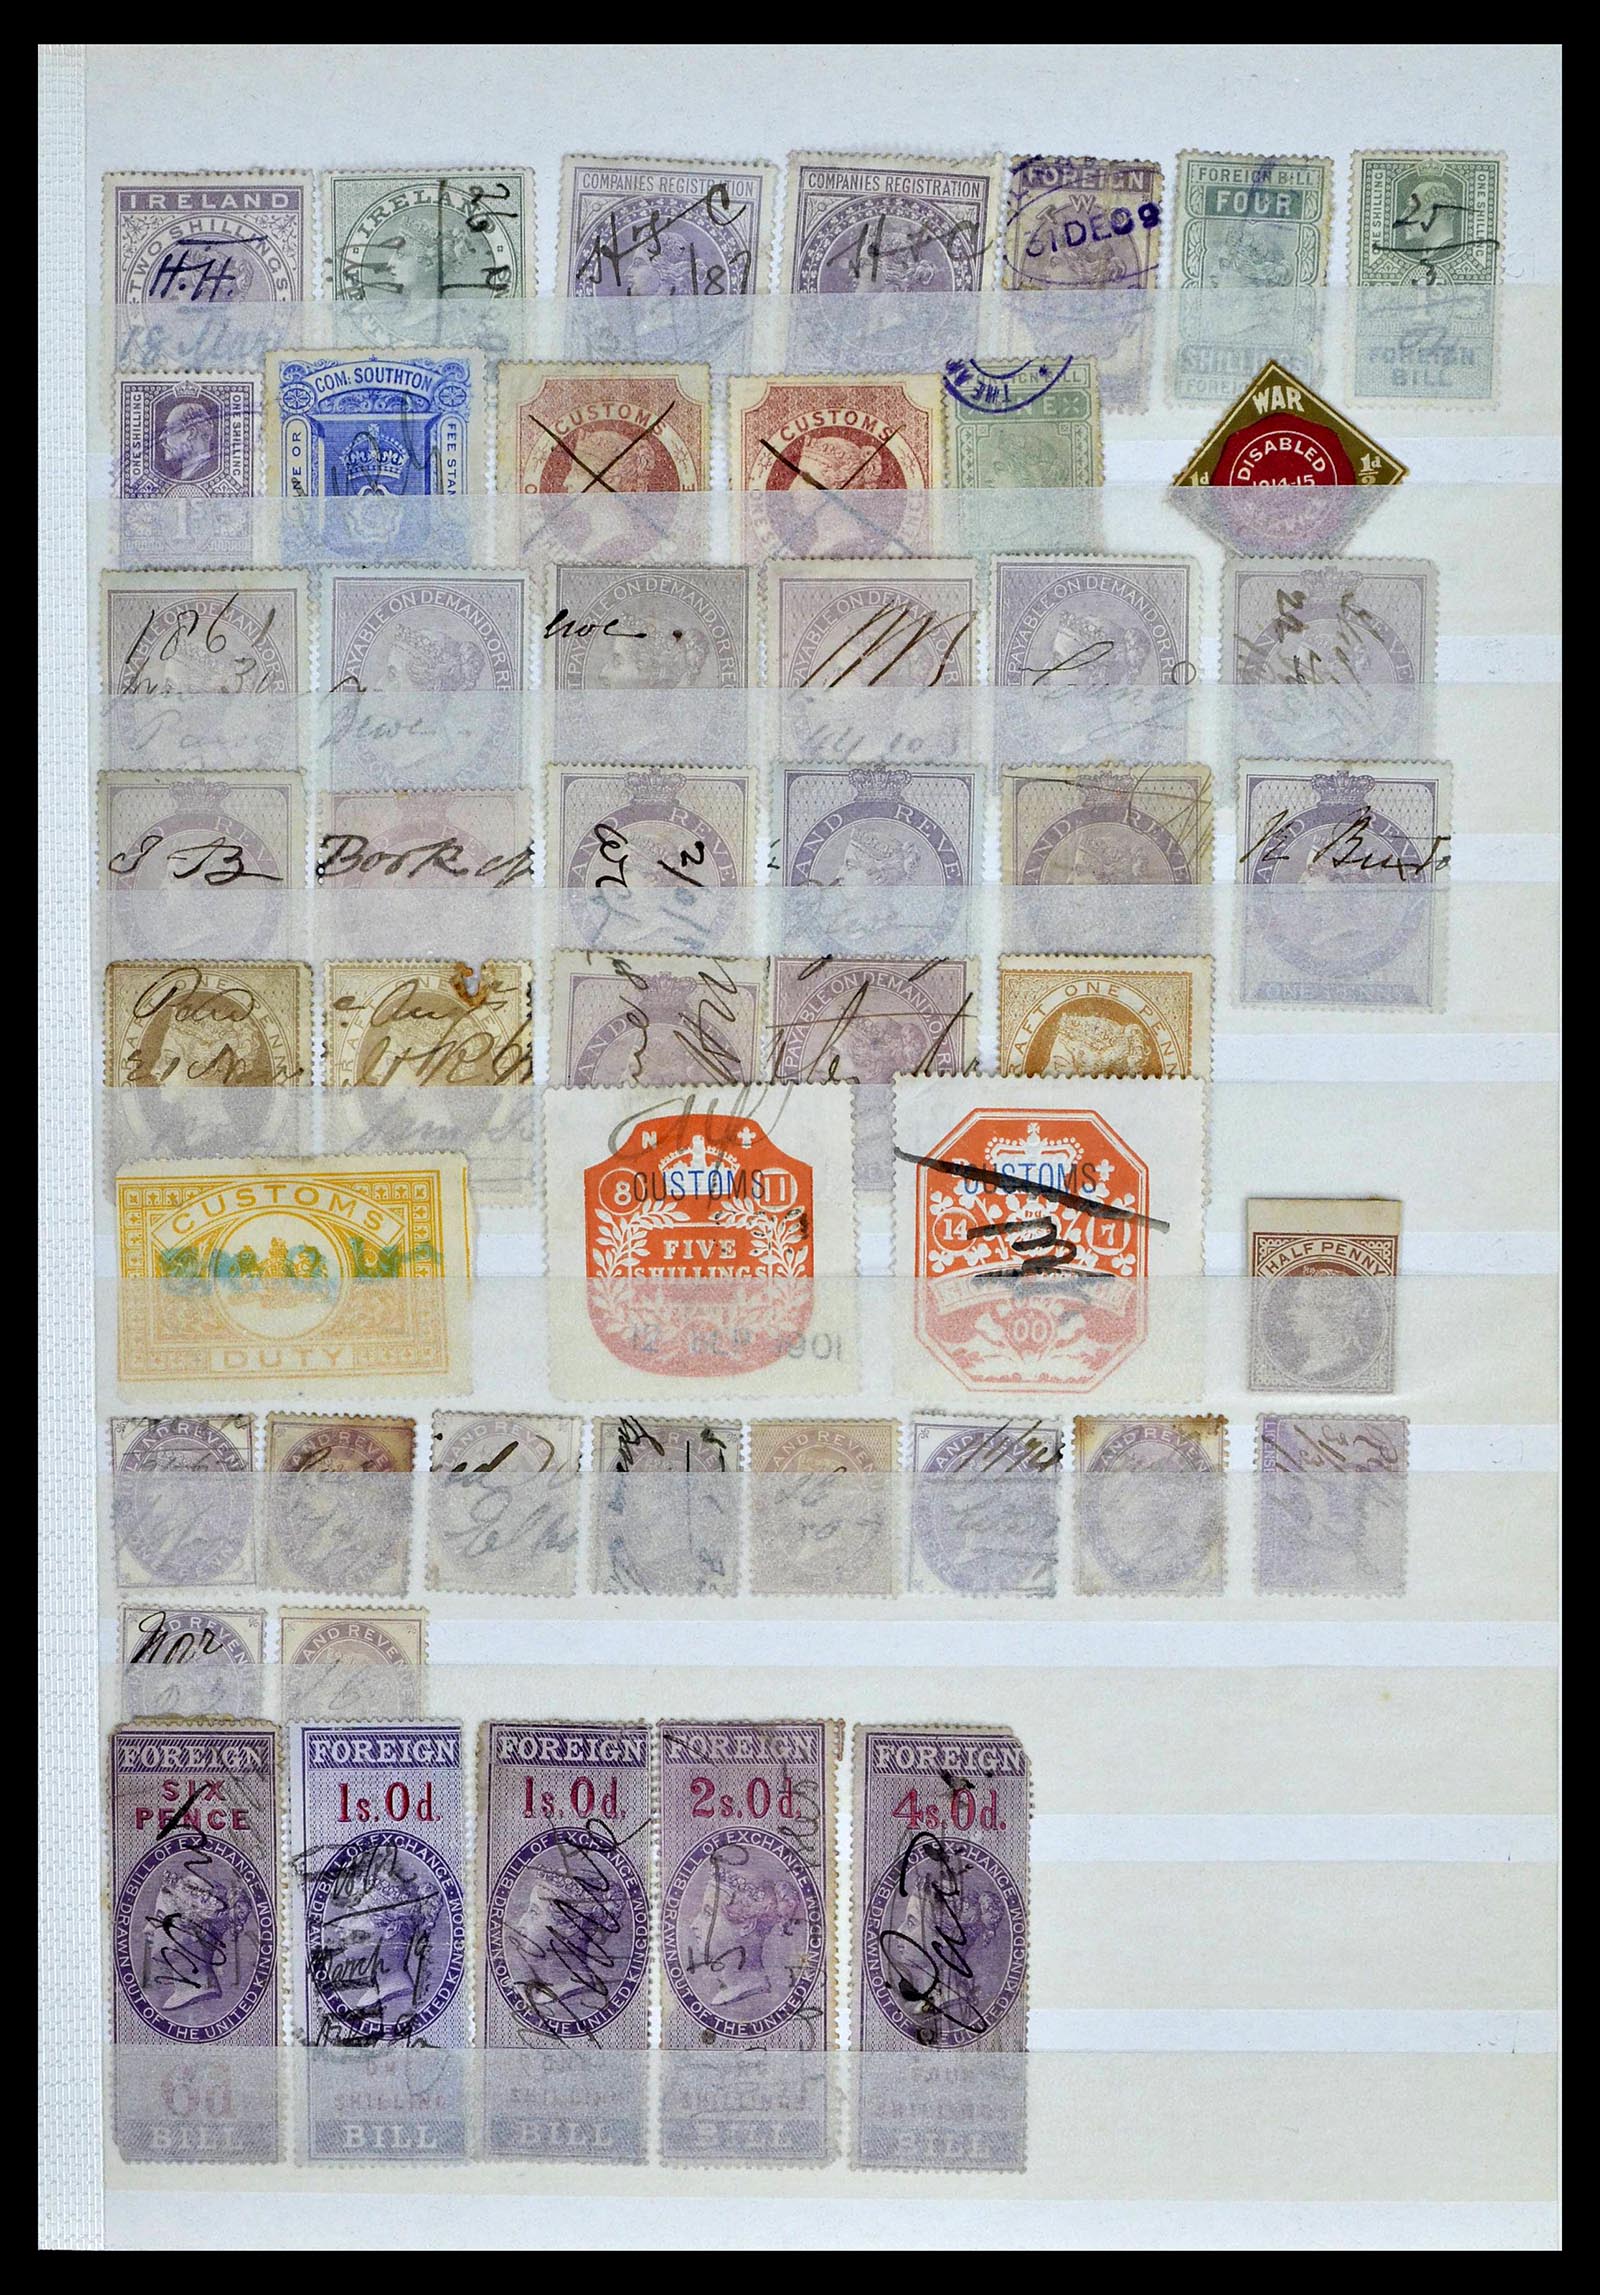 39196 0050 - Stamp collection 39196 Great Britain 1844-1955.